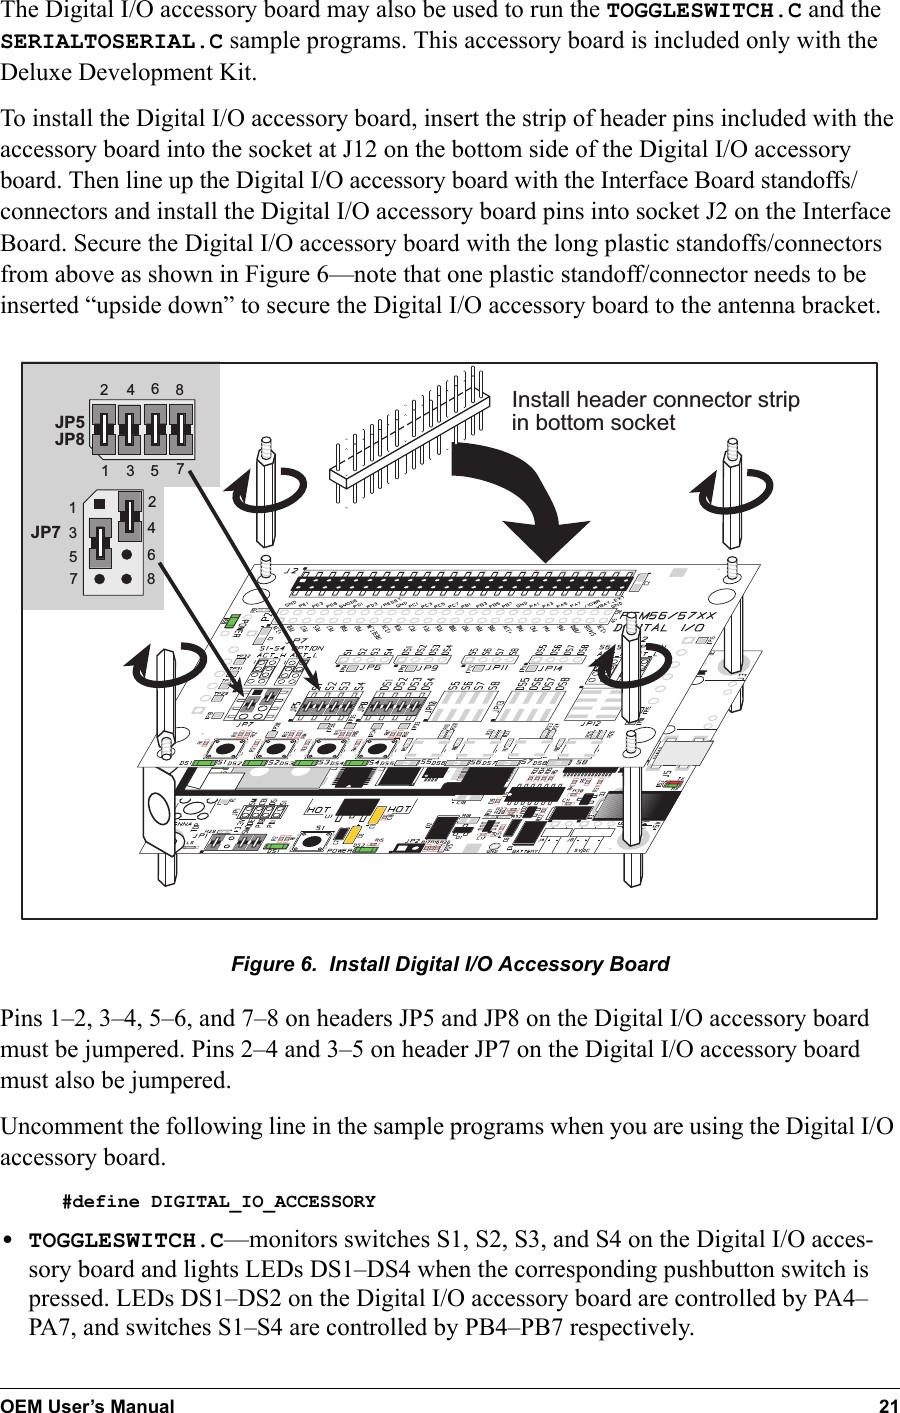 OEM User’s Manual 21The Digital I/O accessory board may also be used to run the TOGGLESWITCH.C and the SERIALTOSERIAL.C sample programs. This accessory board is included only with the Deluxe Development Kit.To install the Digital I/O accessory board, insert the strip of header pins included with the accessory board into the socket at J12 on the bottom side of the Digital I/O accessory board. Then line up the Digital I/O accessory board with the Interface Board standoffs/connectors and install the Digital I/O accessory board pins into socket J2 on the Interface Board. Secure the Digital I/O accessory board with the long plastic standoffs/connectors from above as shown in Figure 6—note that one plastic standoff/connector needs to be inserted “upside down” to secure the Digital I/O accessory board to the antenna bracket.   JP5JP84321657843216578JP7Install header connector stripin bottom socketFigure 6.  Install Digital I/O Accessory Board Pins 1–2, 3–4, 5–6, and 7–8 on headers JP5 and JP8 on the Digital I/O accessory board must be jumpered. Pins 2–4 and 3–5 on header JP7 on the Digital I/O accessory board must also be jumpered.Uncomment the following line in the sample programs when you are using the Digital I/O accessory board.#define DIGITAL_IO_ACCESSORY•TOGGLESWITCH.C—monitors switches S1, S2, S3, and S4 on the Digital I/O acces-sory board and lights LEDs DS1–DS4 when the corresponding pushbutton switch is pressed. LEDs DS1–DS2 on the Digital I/O accessory board are controlled by PA4–PA7, and switches S1–S4 are controlled by PB4–PB7 respectively.